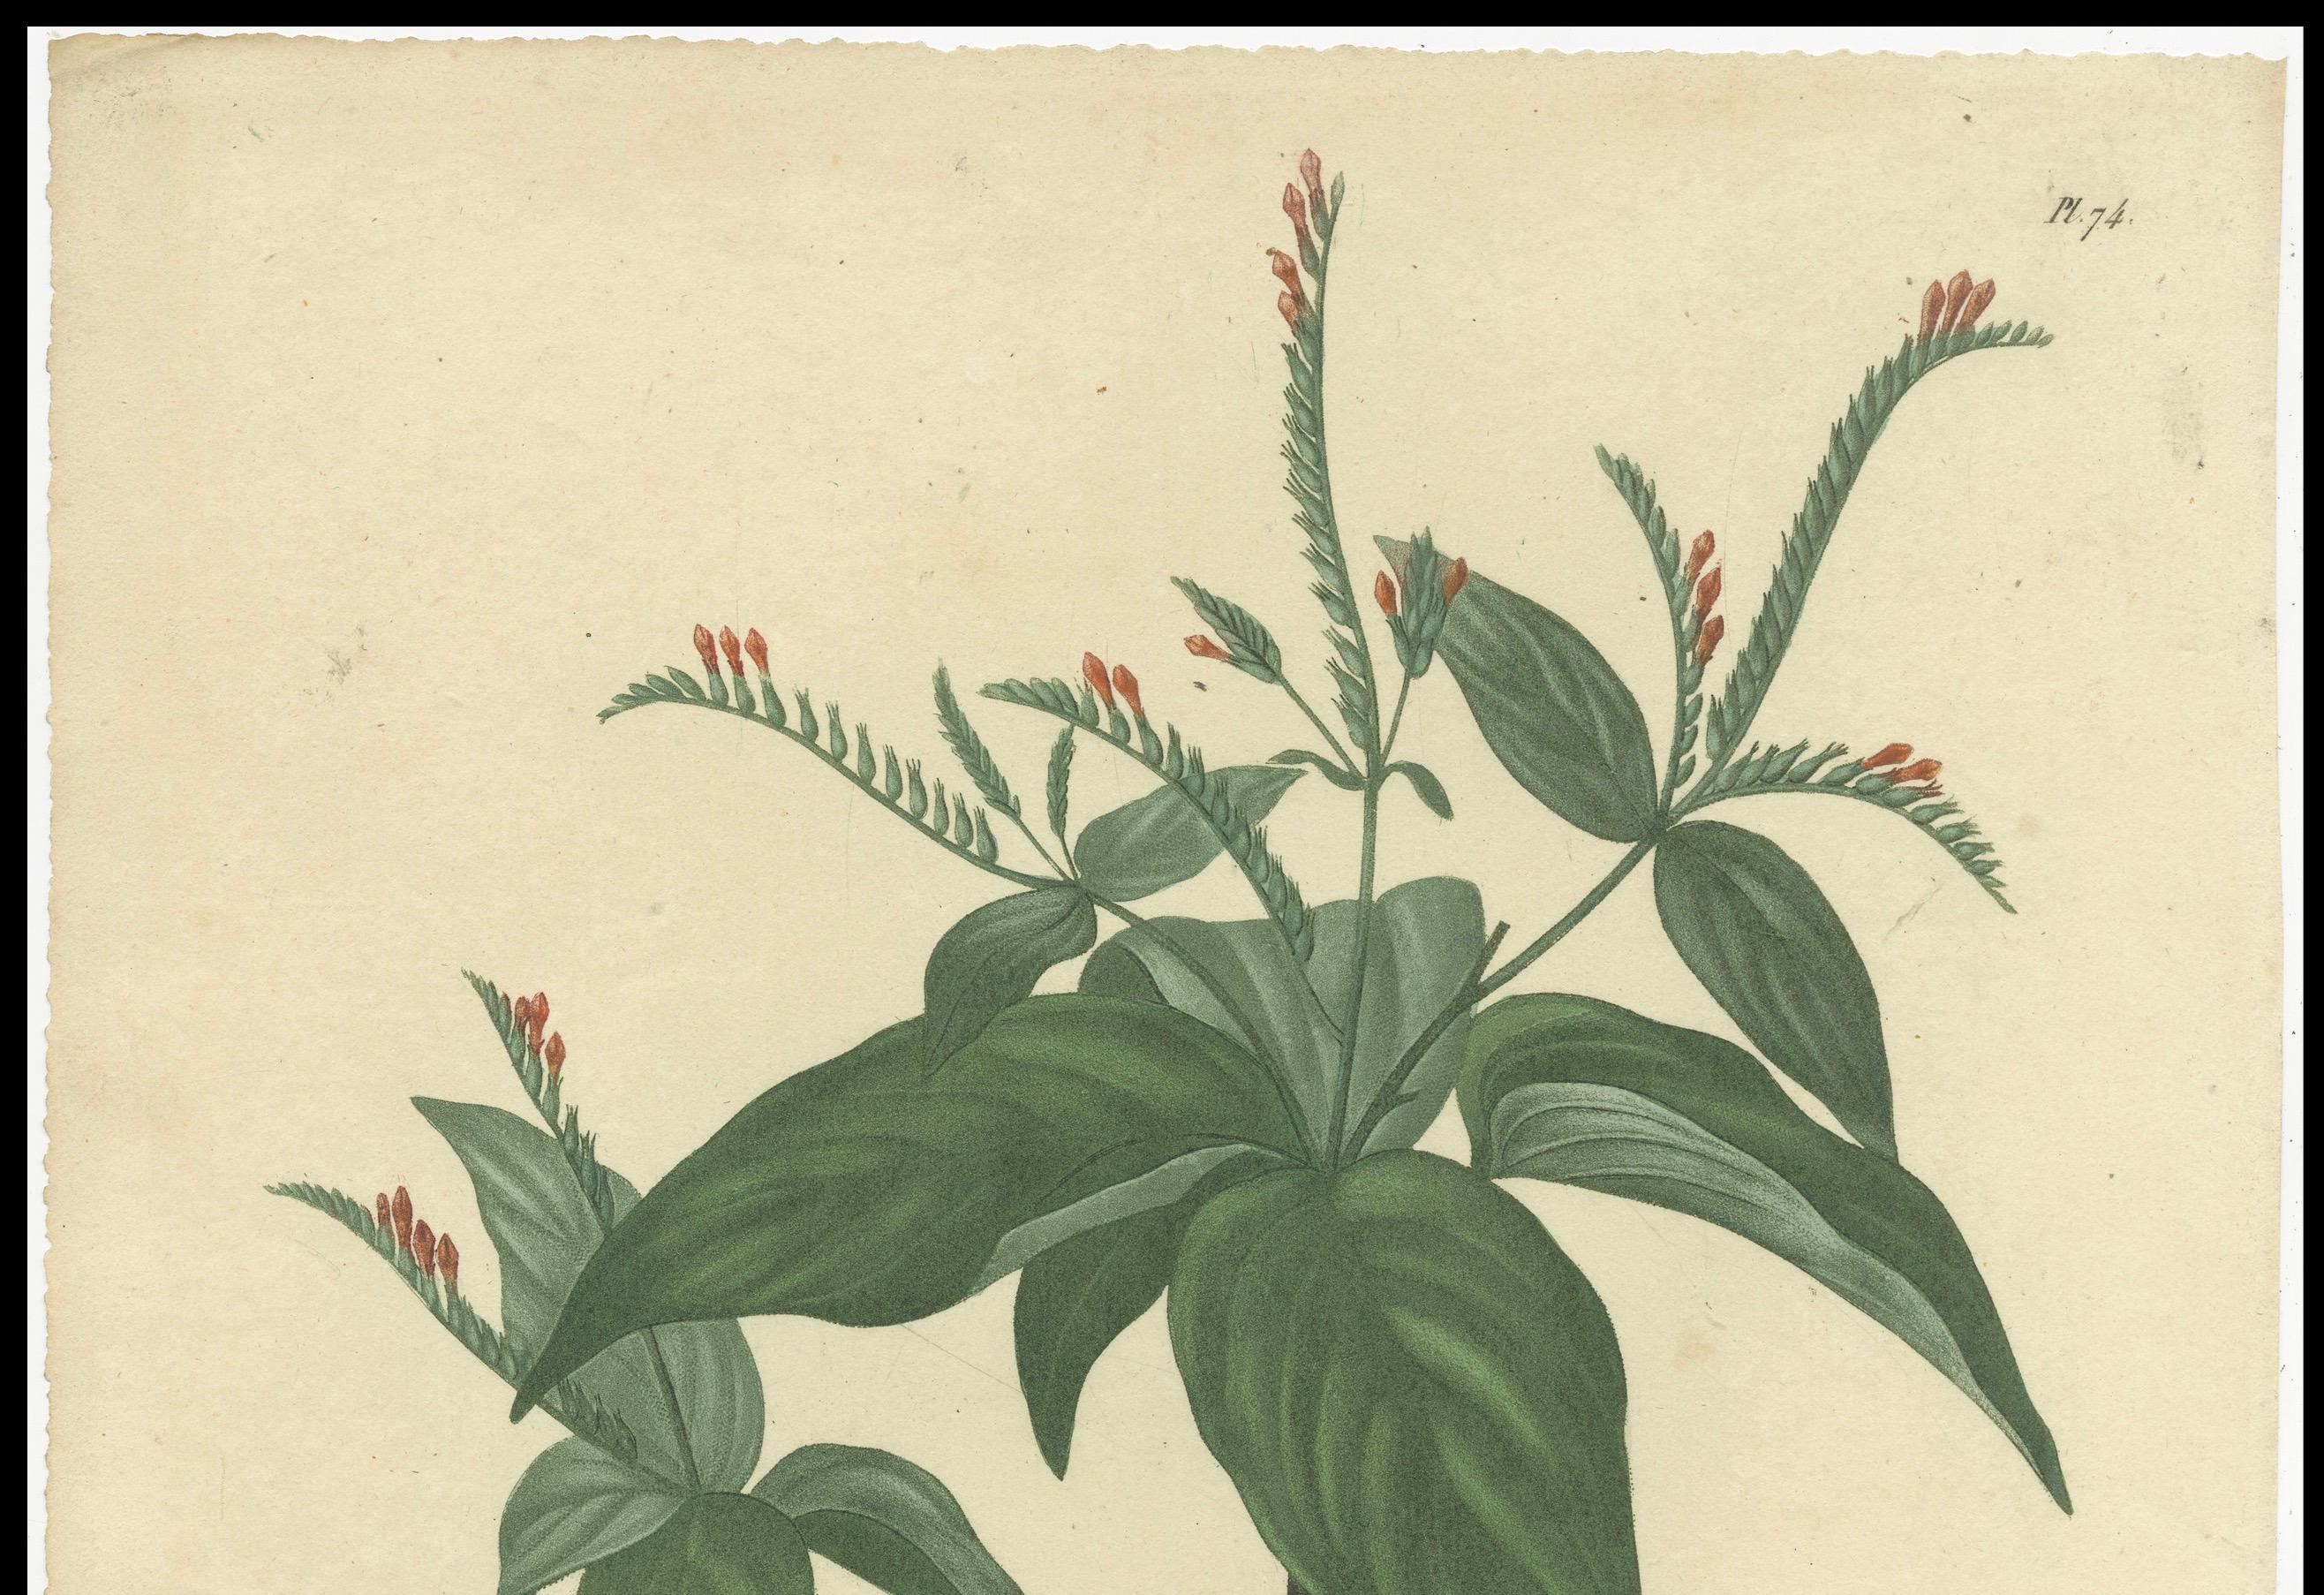 Antique botanical print titled 'Spigelia Anthelminthique'. This print shows the a Spigelia species, pinkroot is a common name for plants in this genus. Spigelia is a genus of flowering plants in the family Loganiaceae. It contains around 60 species,